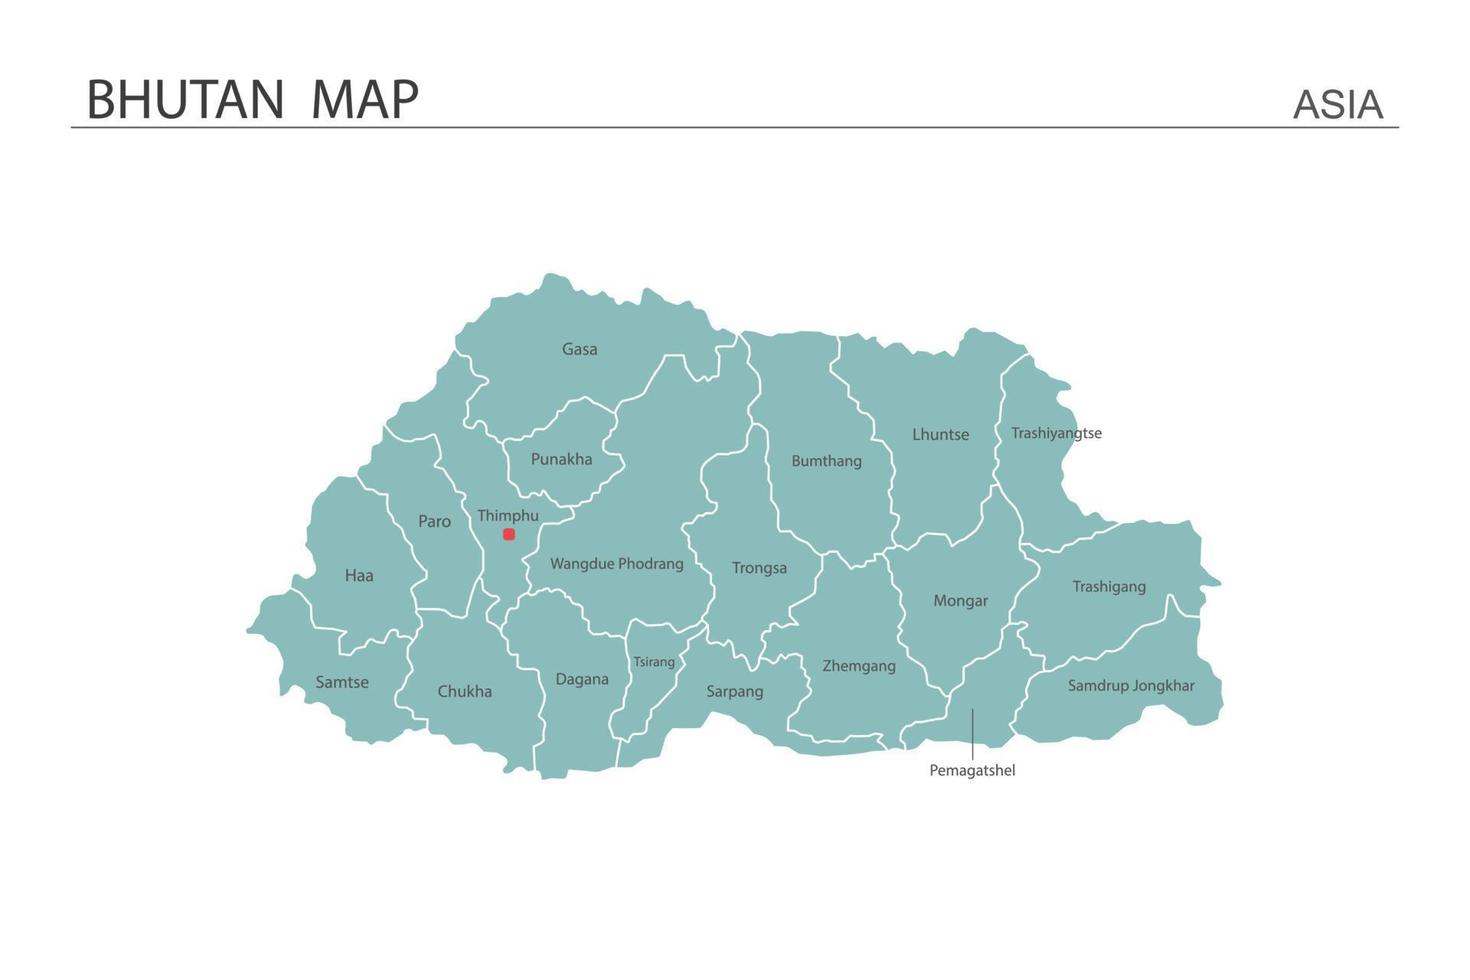 Bhutan map vector illustration on white background. Map have all province and mark the capital city of Bhutan.